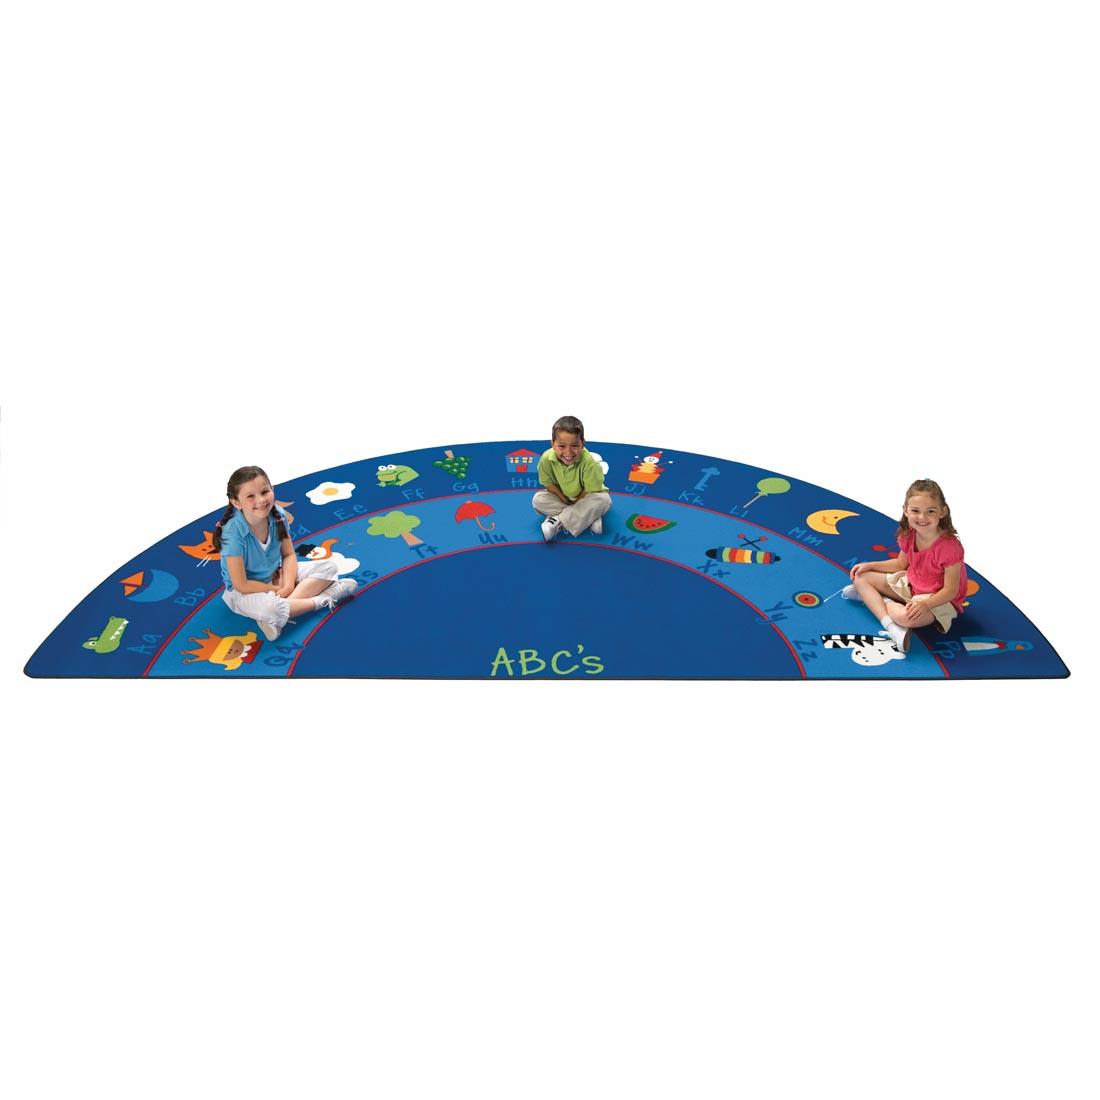 Three children sitting on the Fun With Phonics Semi-Circle Rug by Carpets For Kids